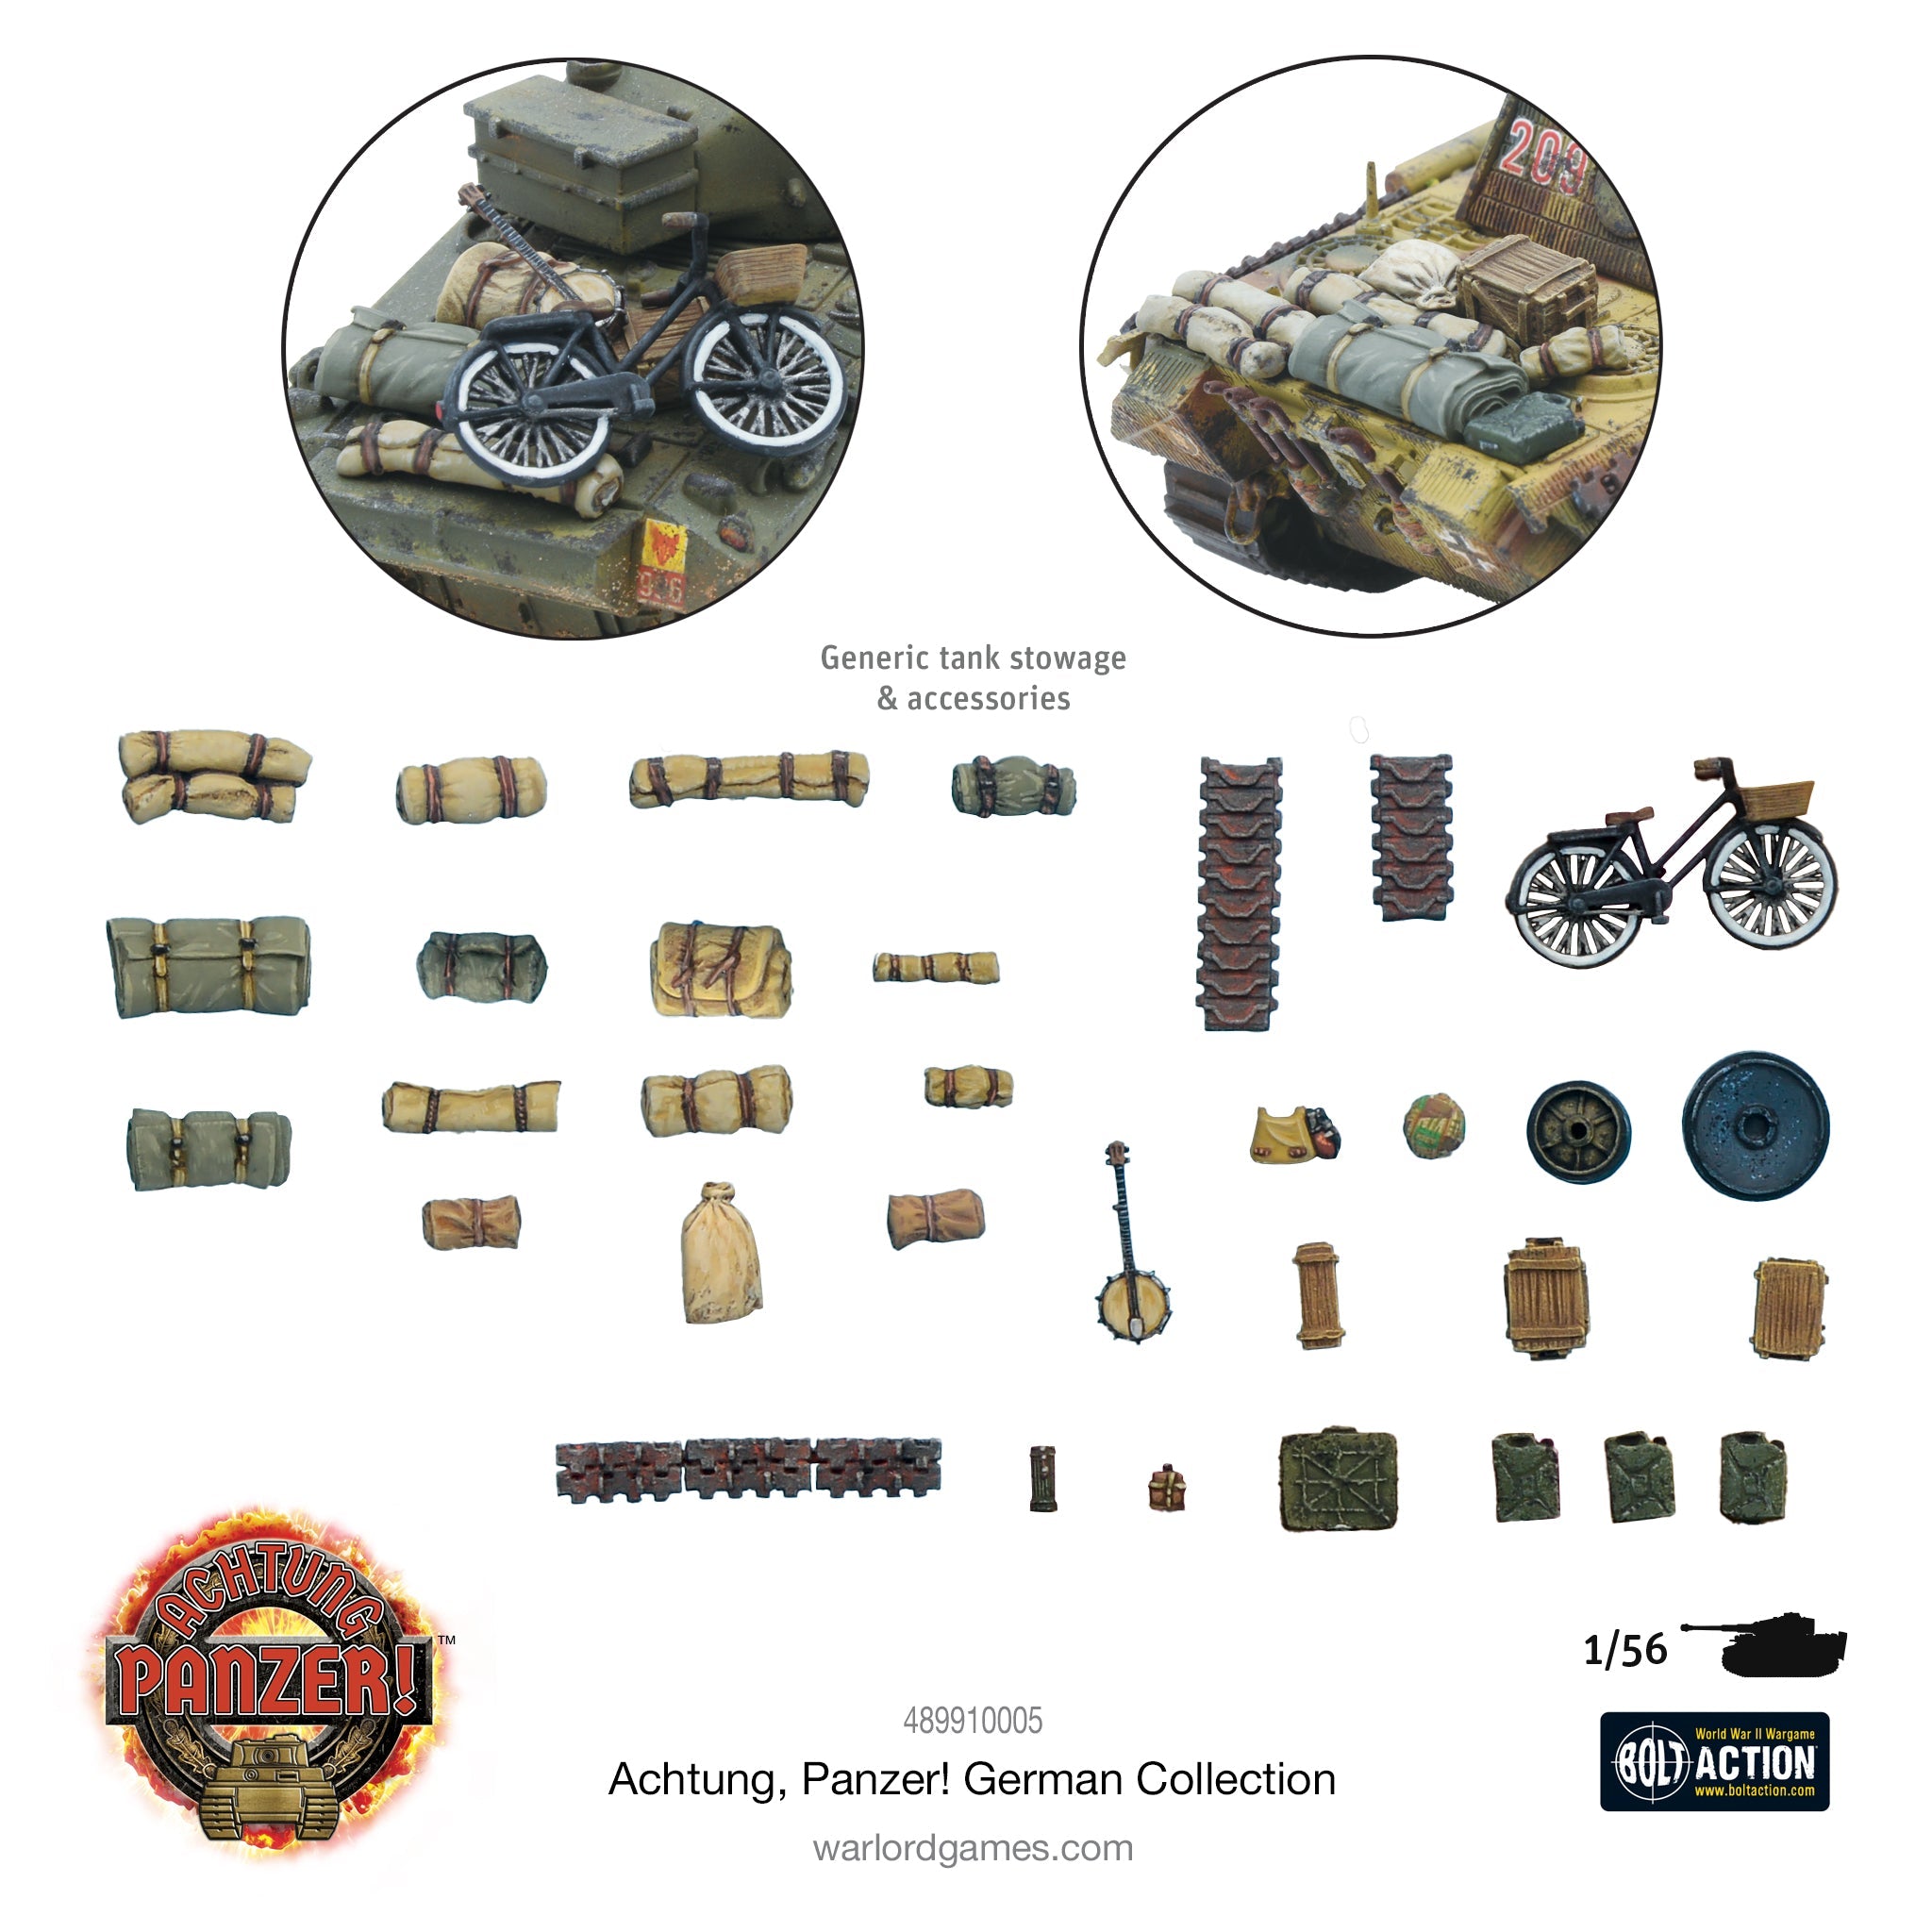 Achtung Panzer! German Collection